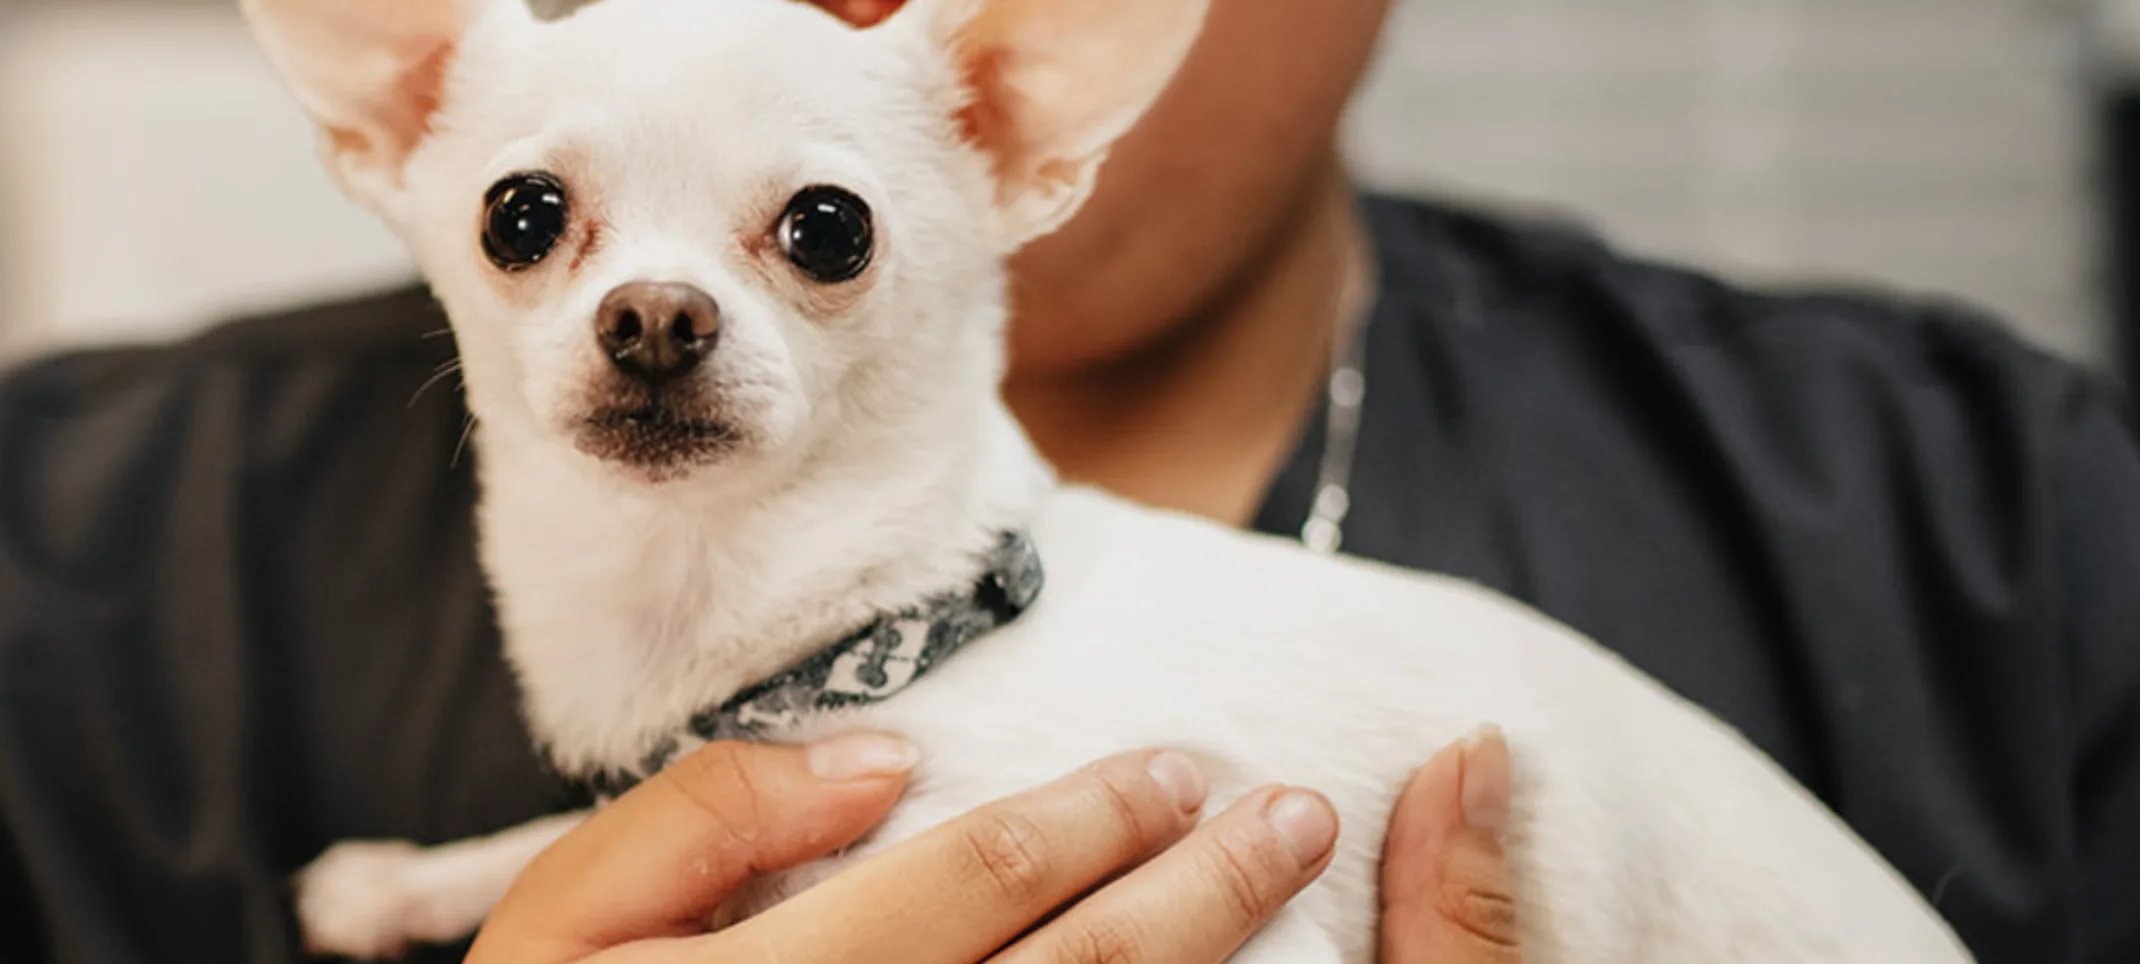 Staff member holding a small white Chihuahua dog